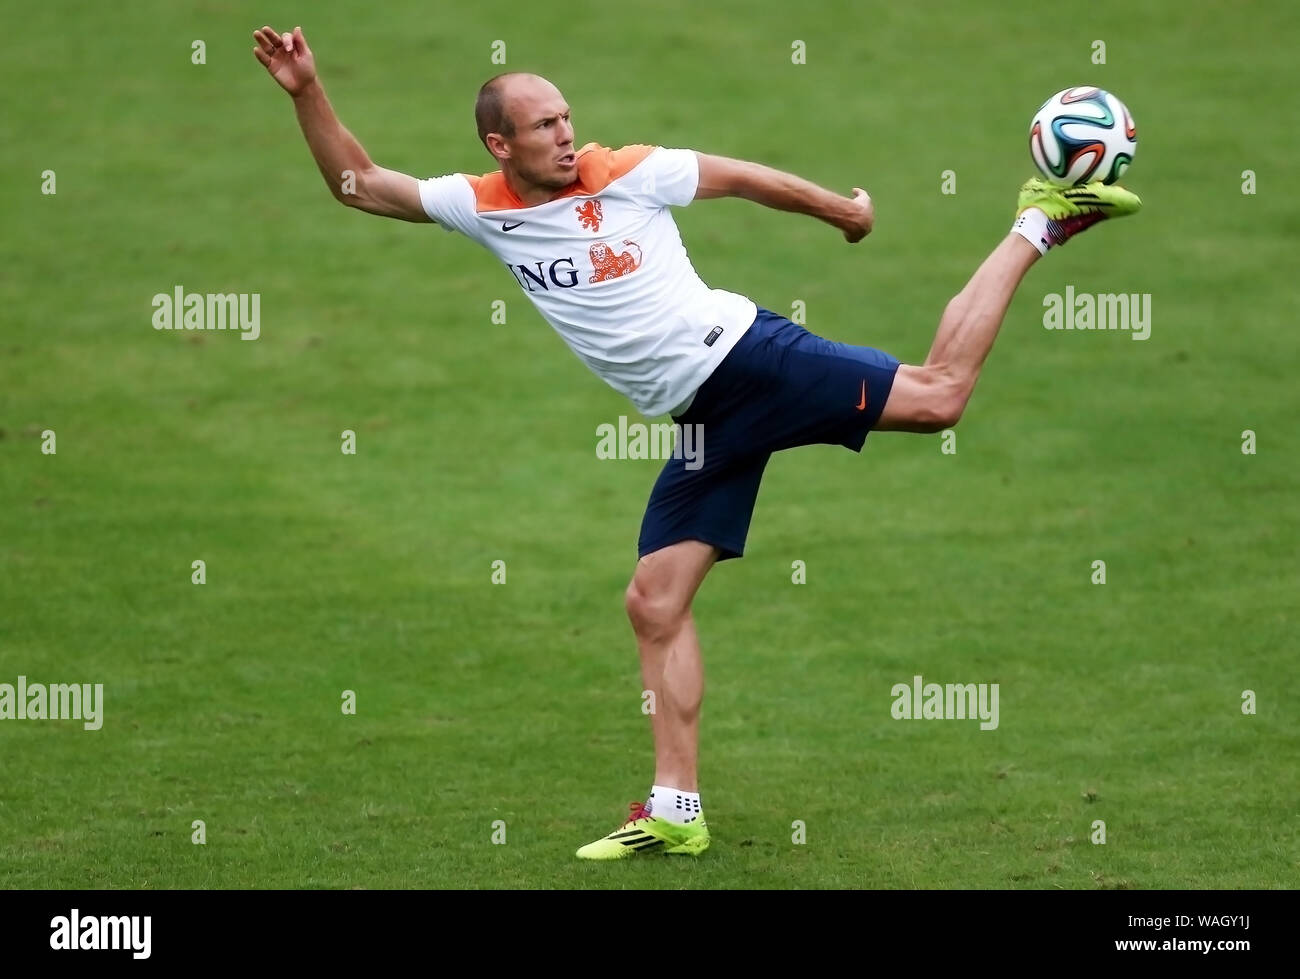 Rio de Janeiro, June 10, 2014. Player Robben of the Dutch soccer team in training at the Clube do Flamengo field during the Soccer World Cup 2014 in t Stock Photo